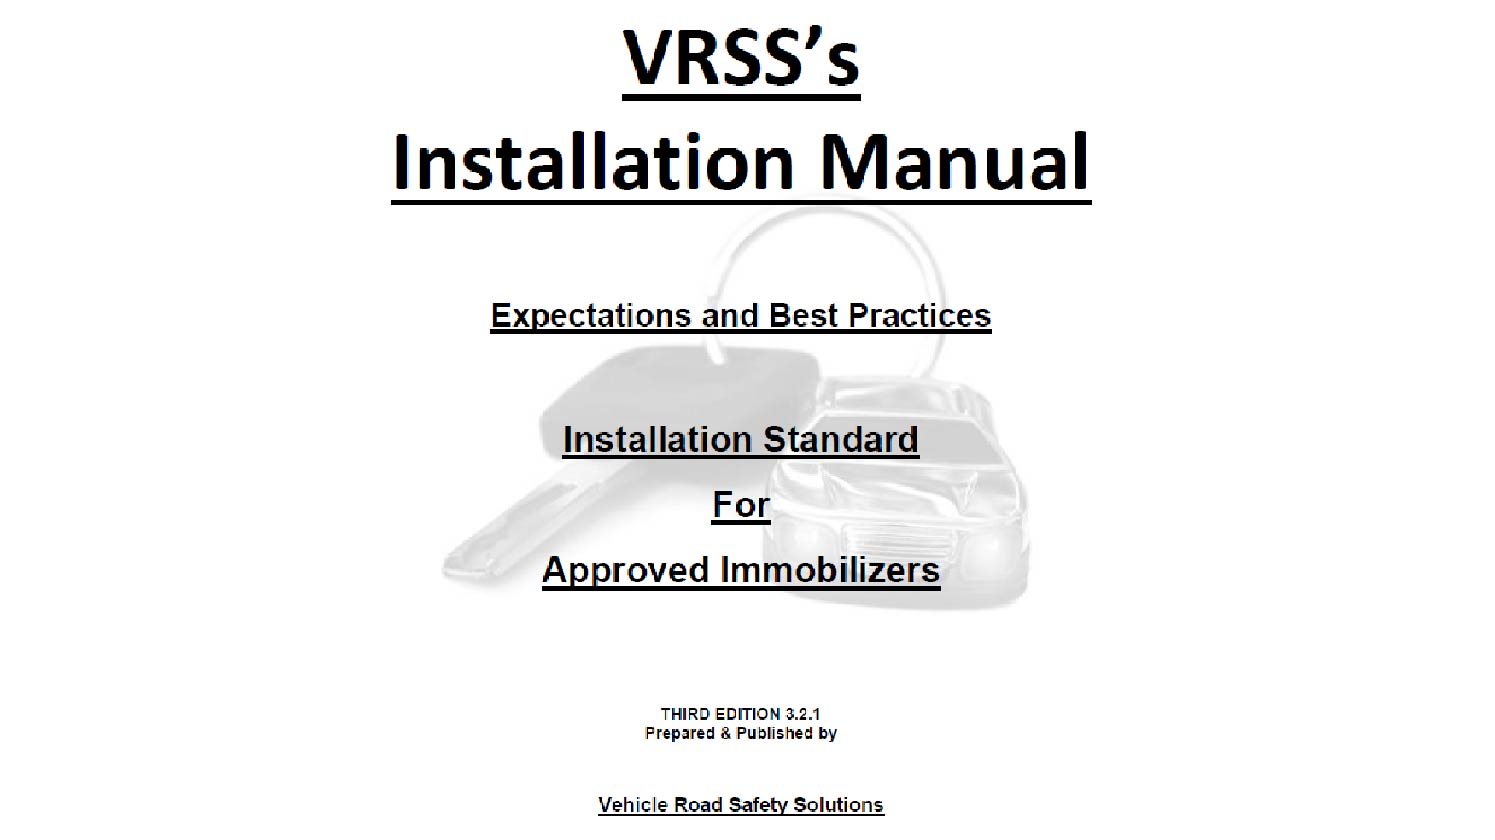 Image of installation manual cover.